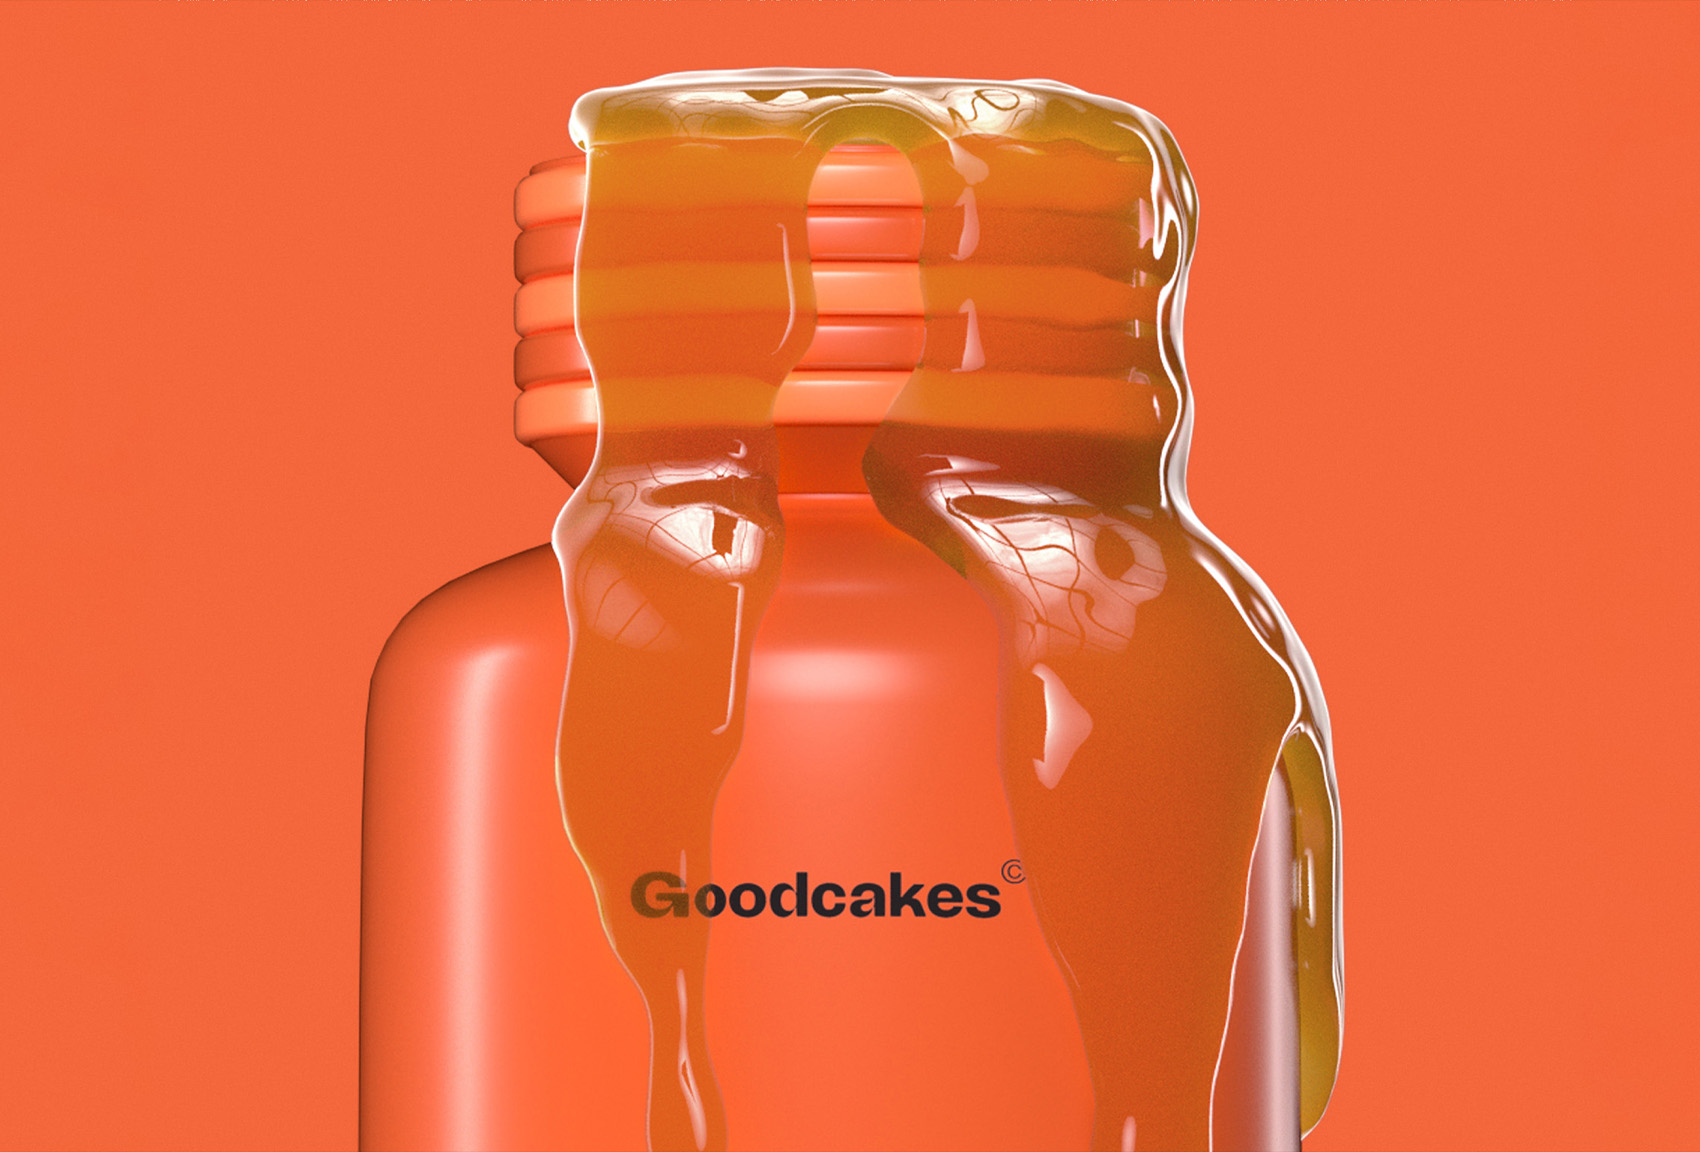 Goodcakes Branding and Packaging Design